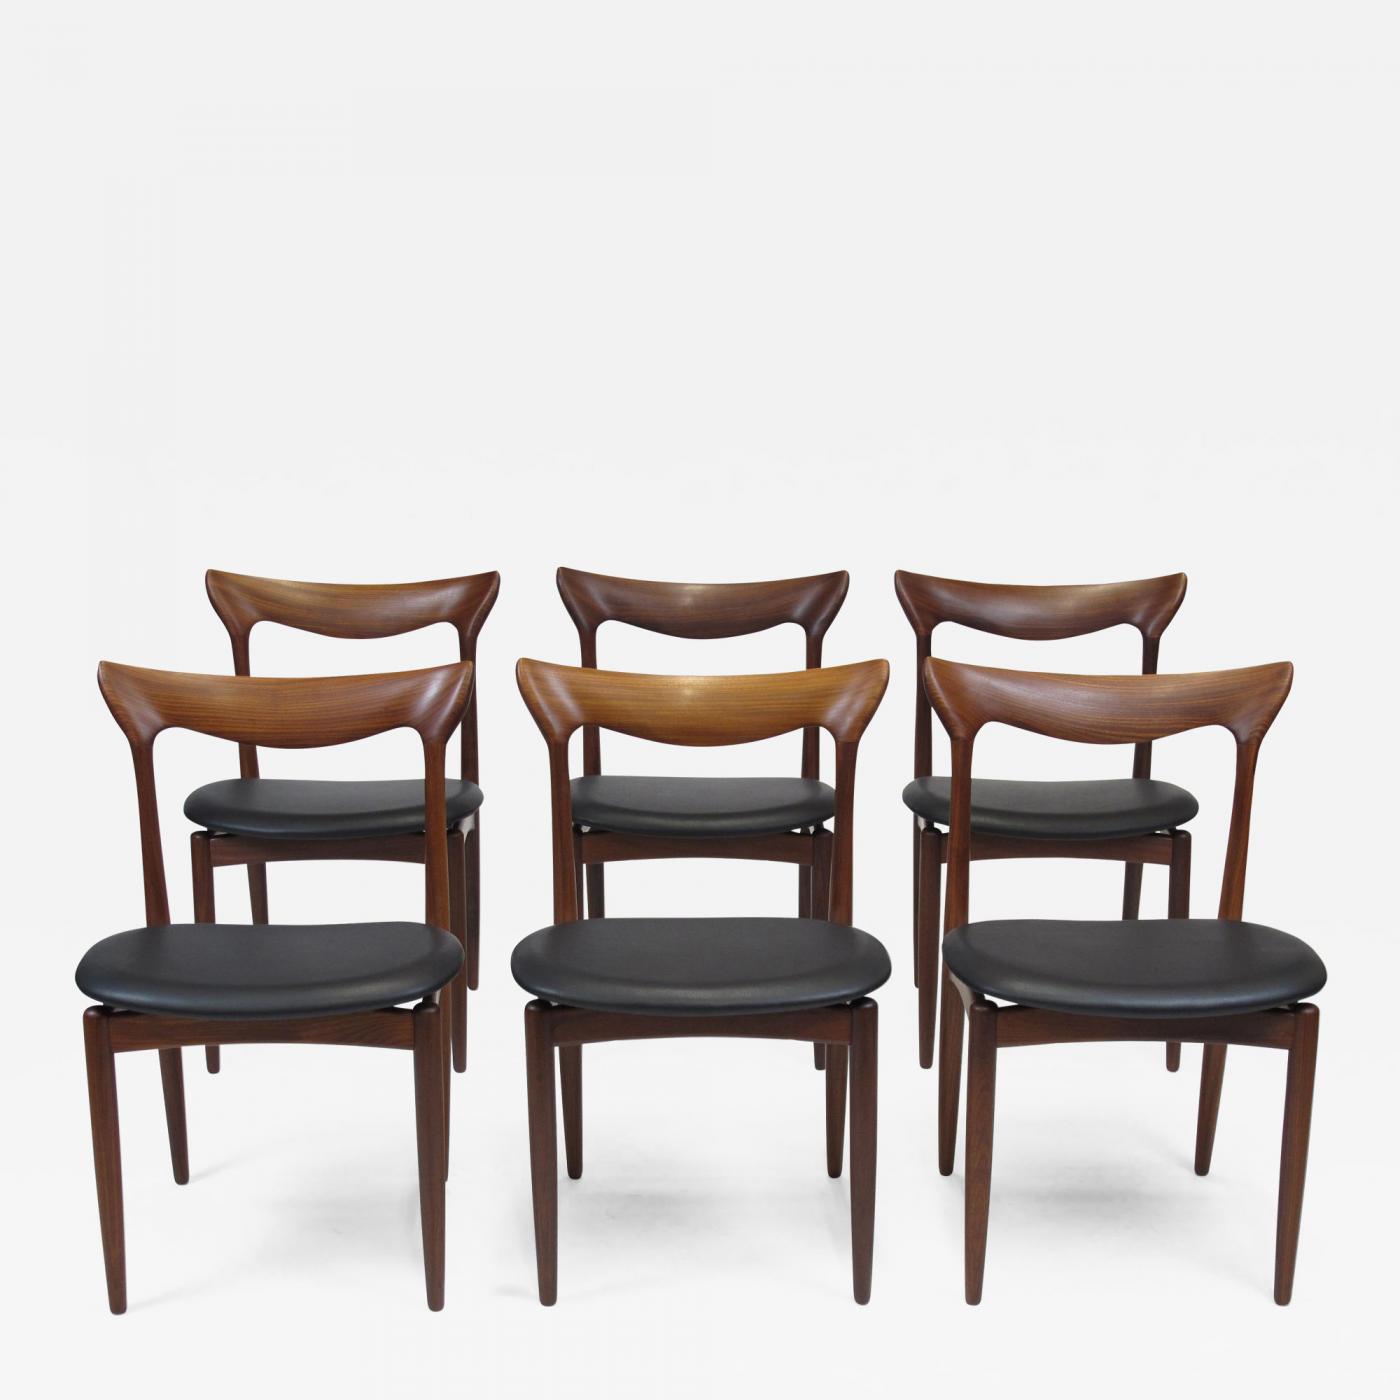 https://cdn.incollect.com/sites/default/files/zoom/H-W-Klein-H-W-Klein-Sculpted-Back-Dining-Chairs-of-Walnut-Set-of-Six-340000-1221077.jpg